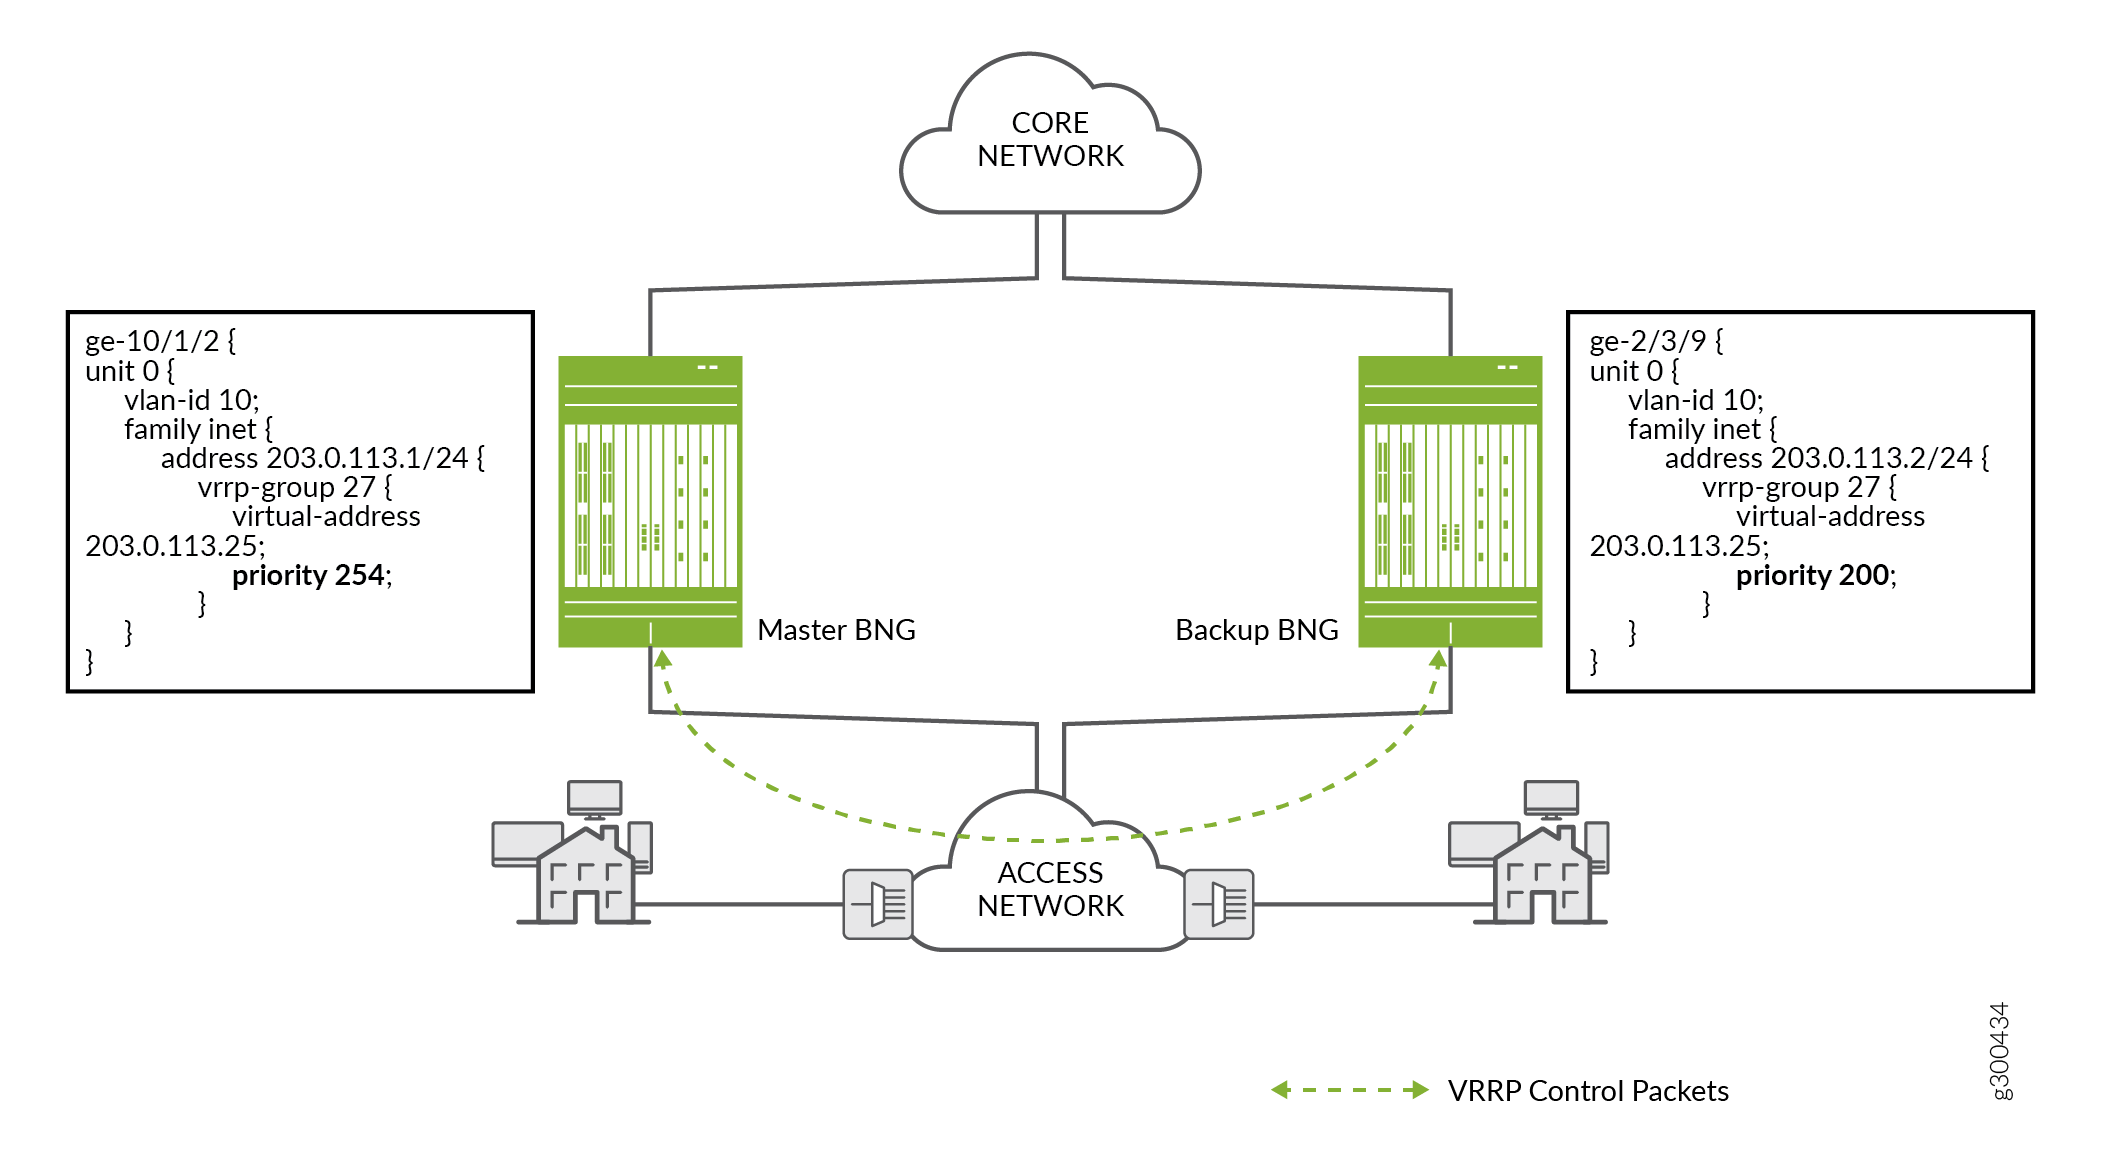 VRRP Topology and Configuration for Primary and Backup Routers